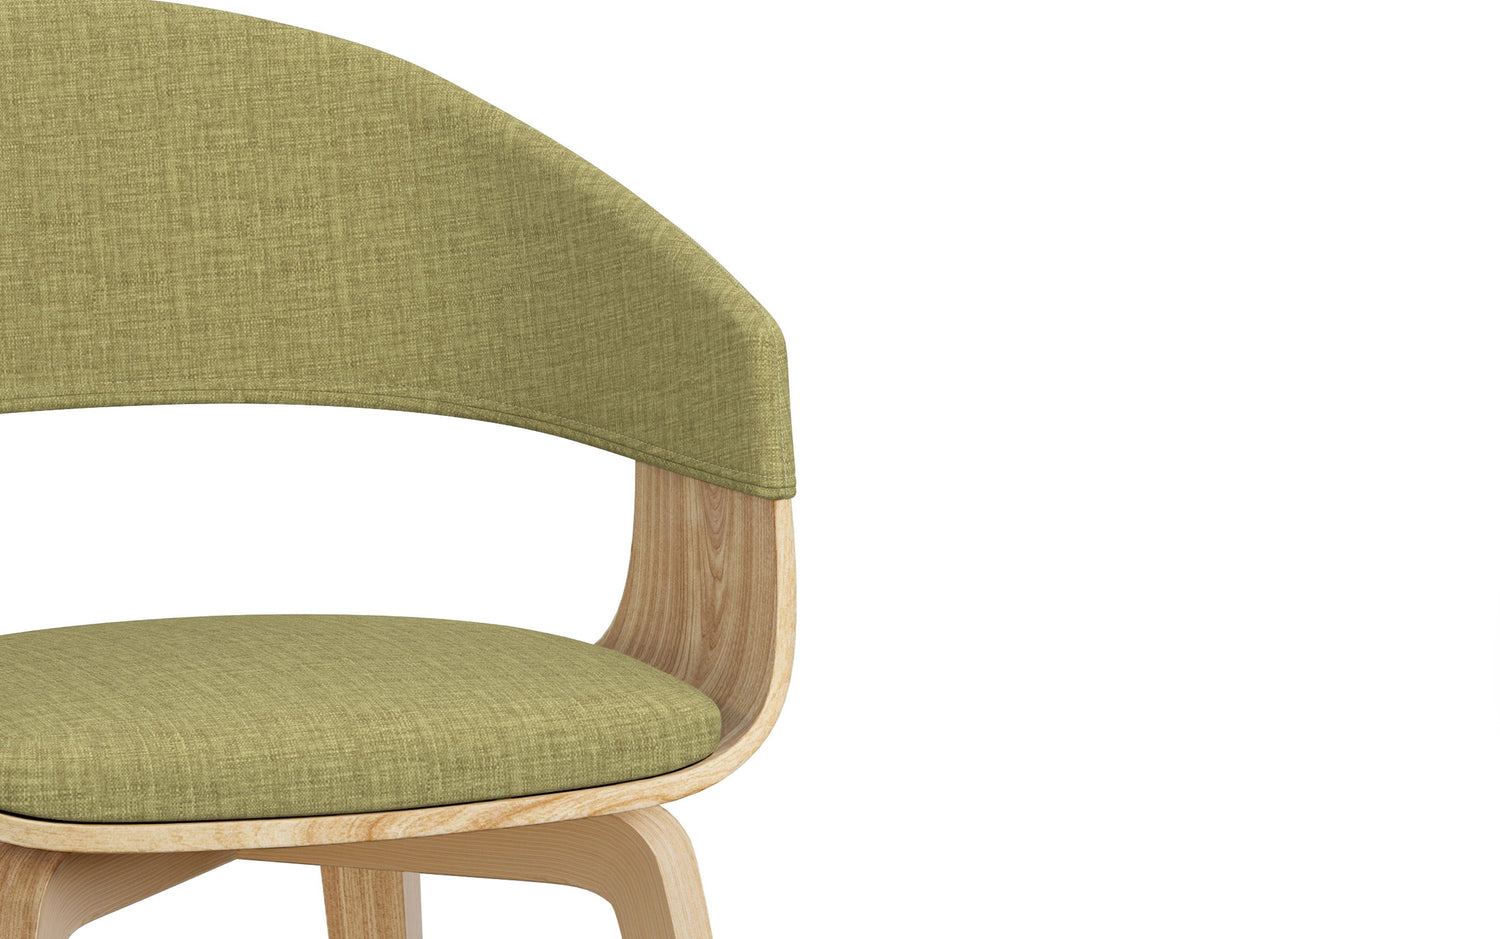 Acid Green Natural Oak Linen Style Fabric | Lowell Bentwood Dining Chair